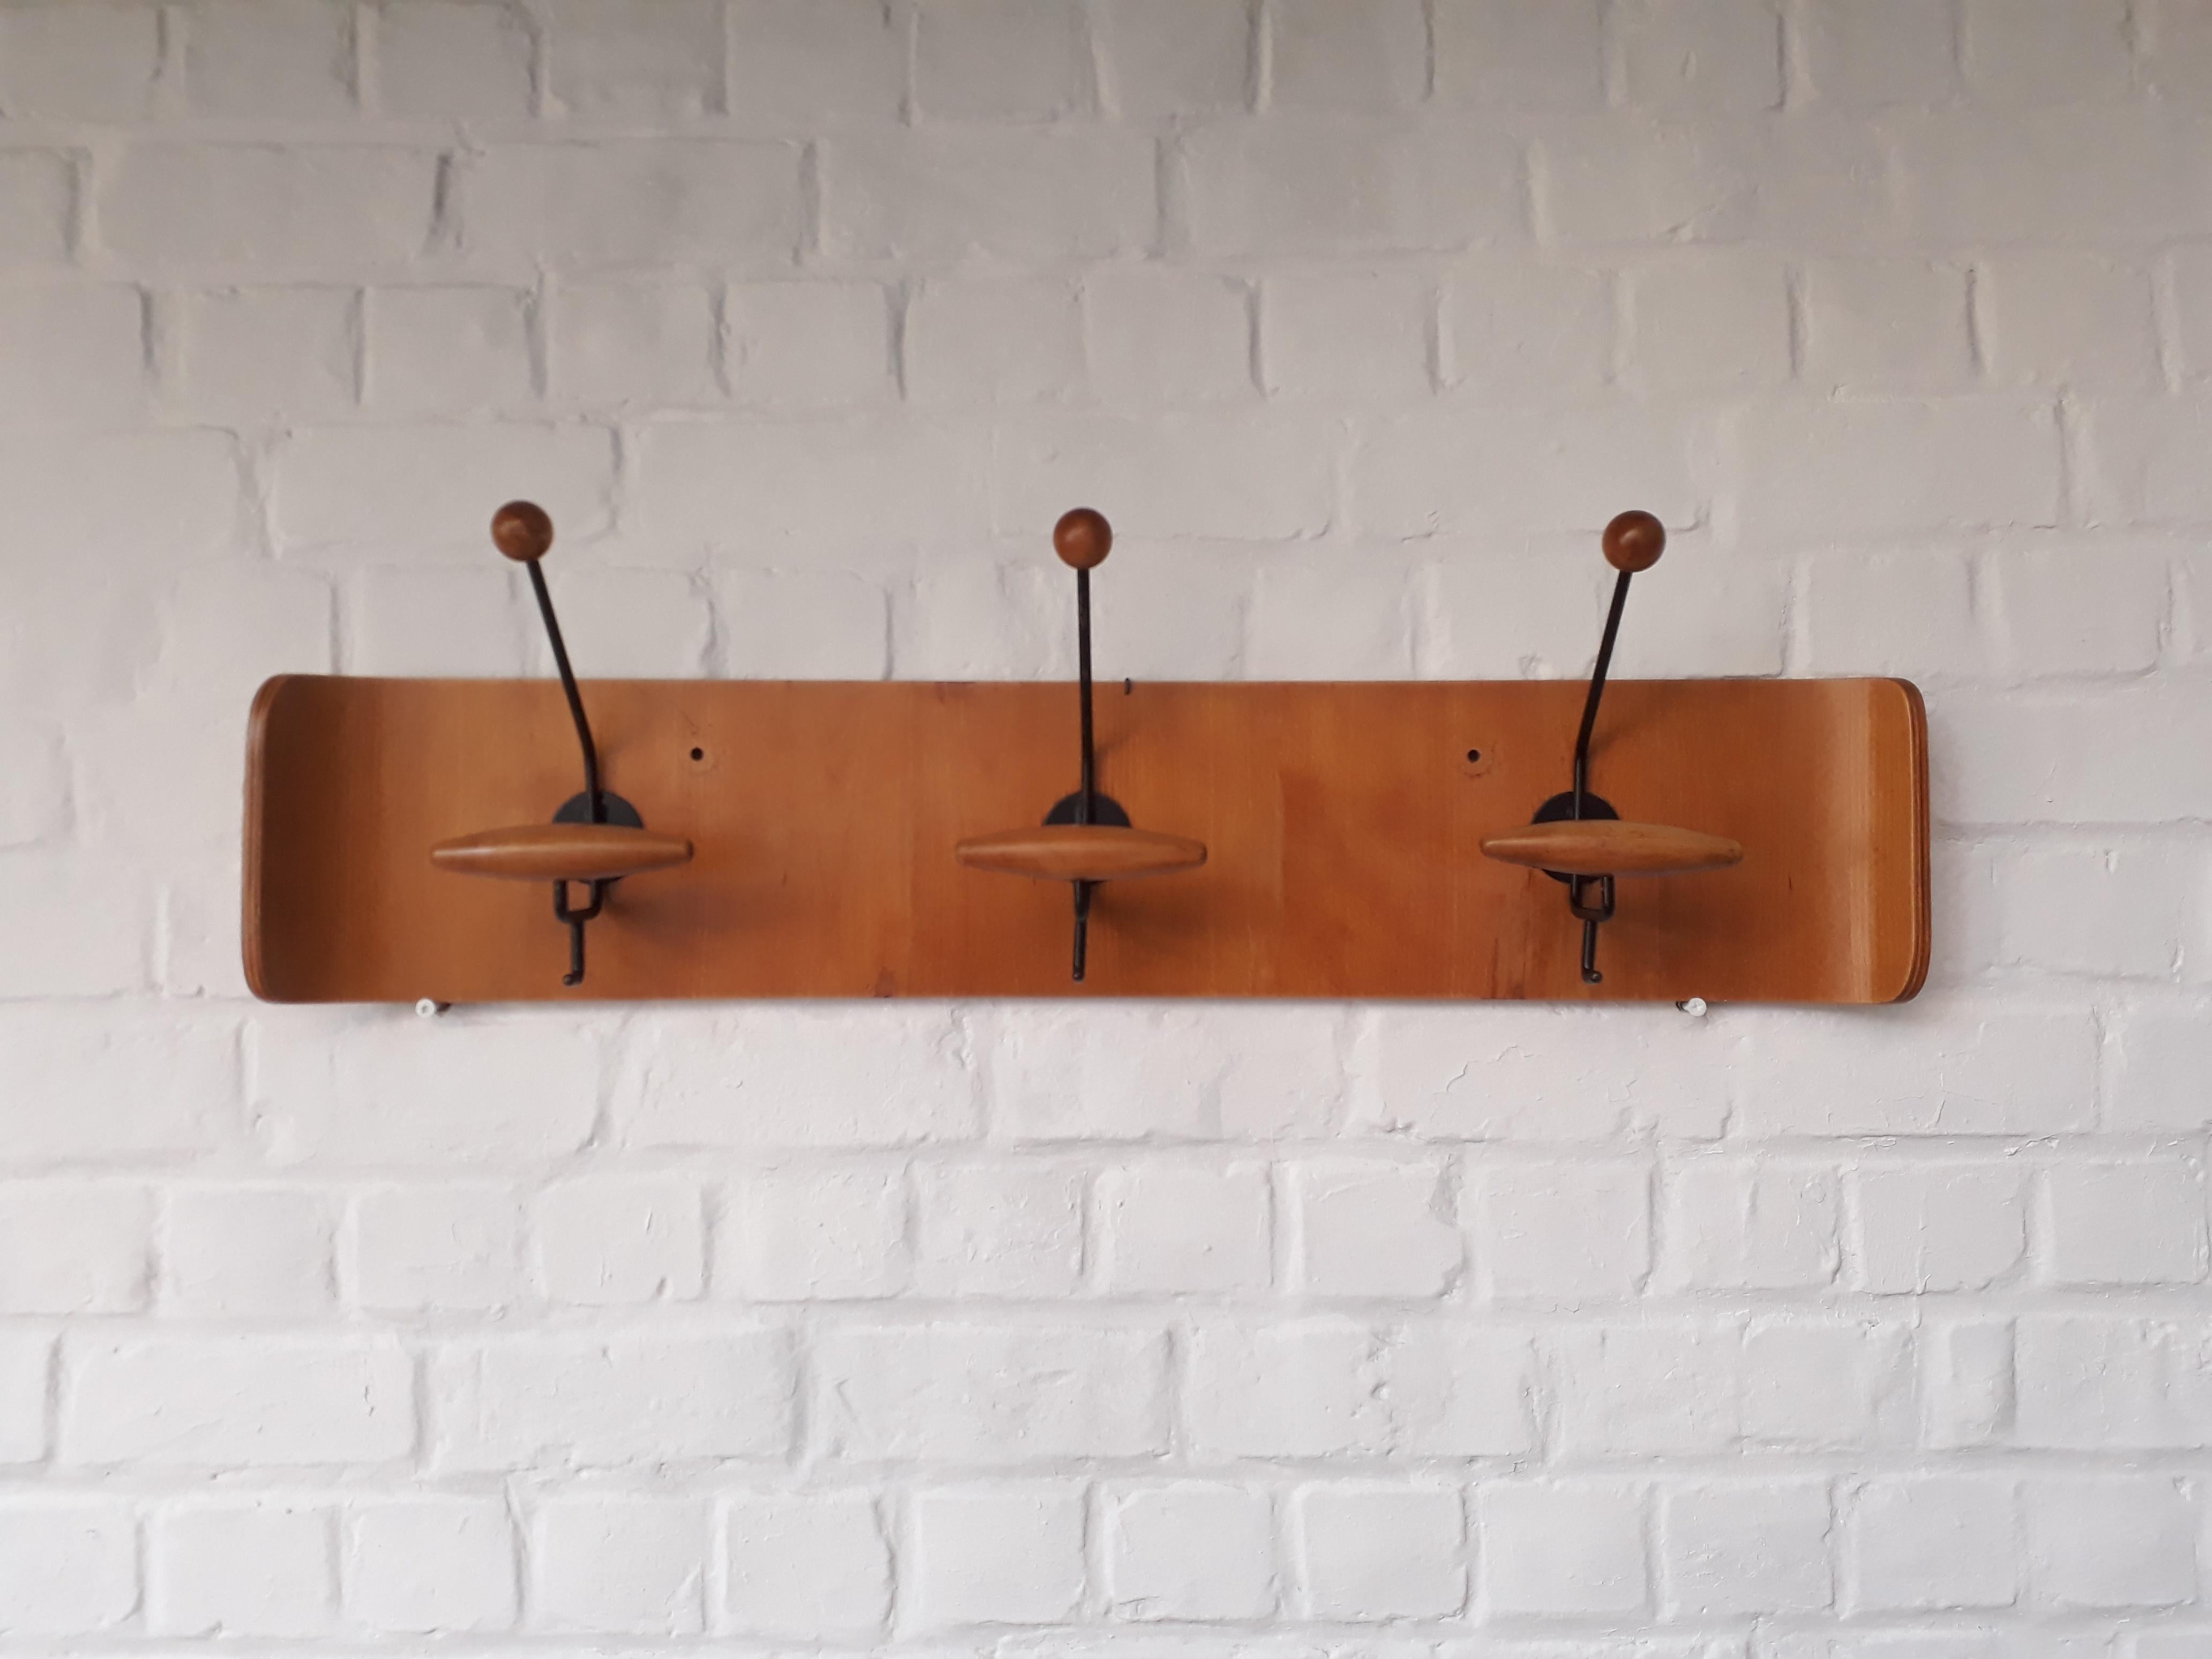 Italian sleek design coatrack with a skateboard shaped plywood back matching black metal painted hanger bases. Each hanger has a 2x wooden elements ornating it a bit more.